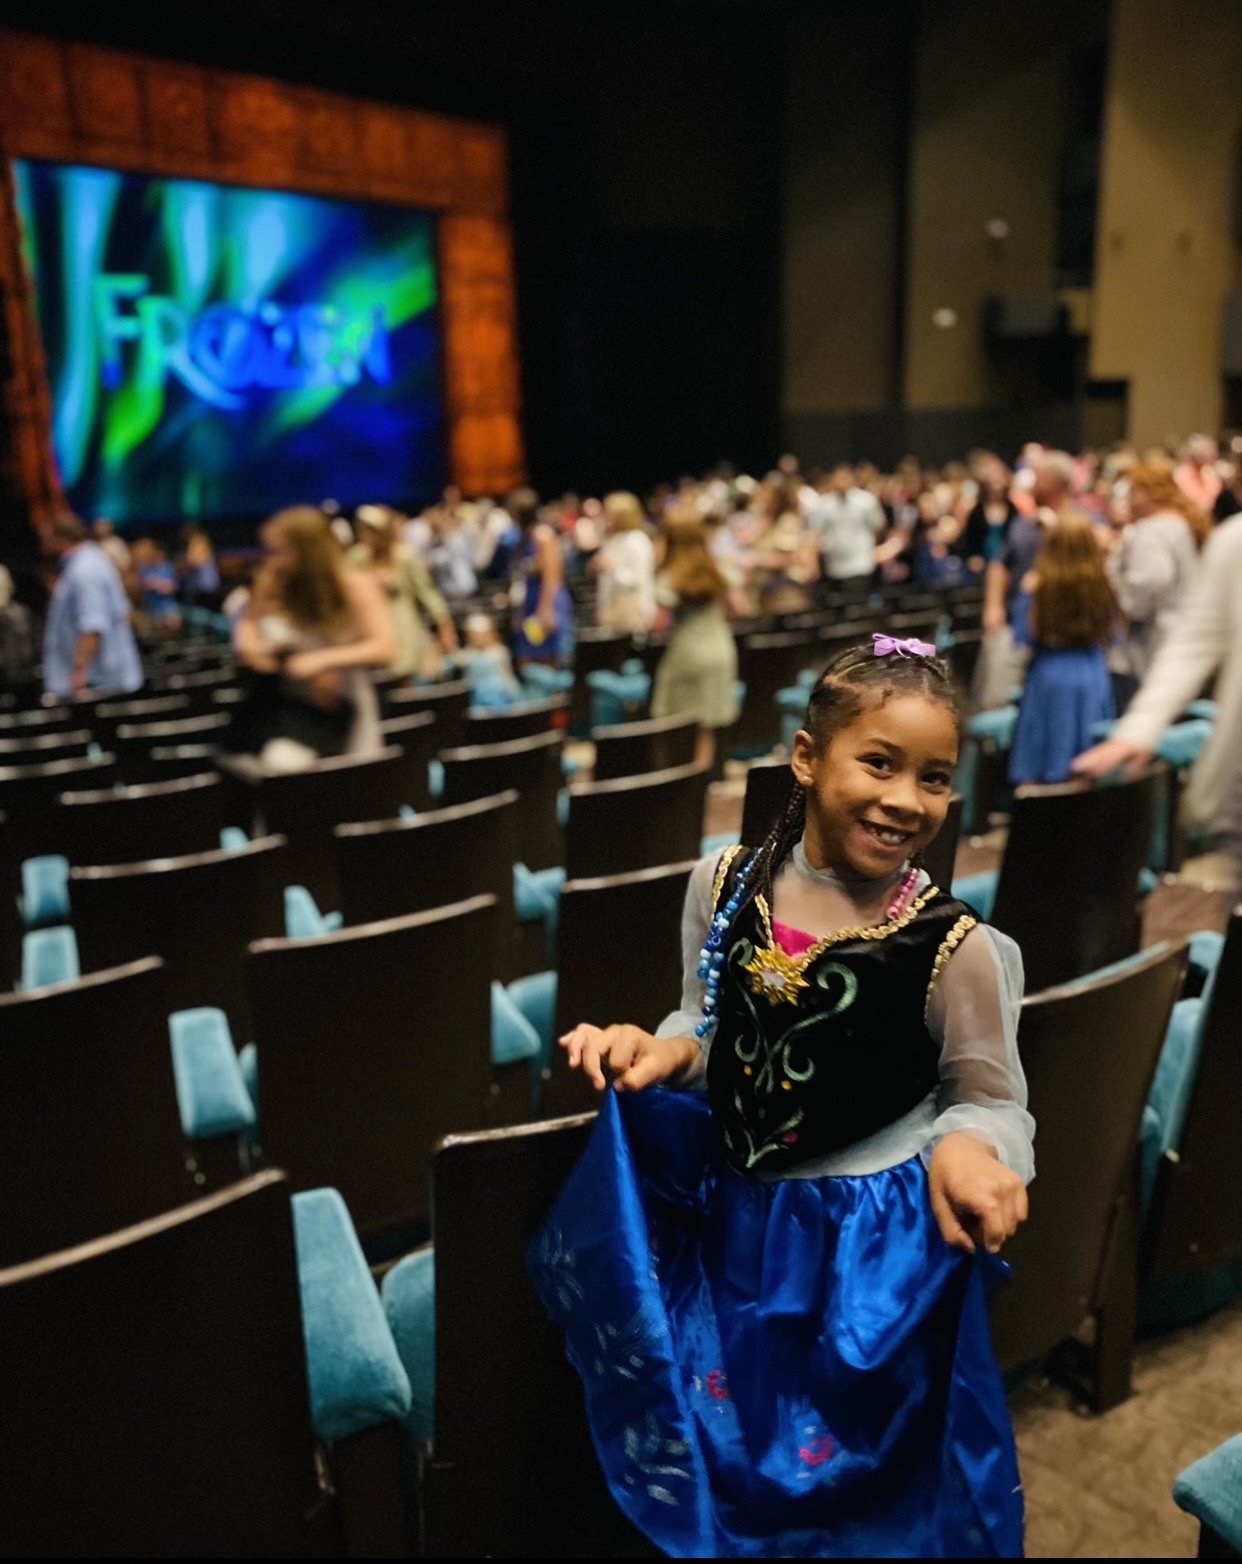 Dressed up for Disney_s FROZEN - photo courtesy of Broadway Dallas.png